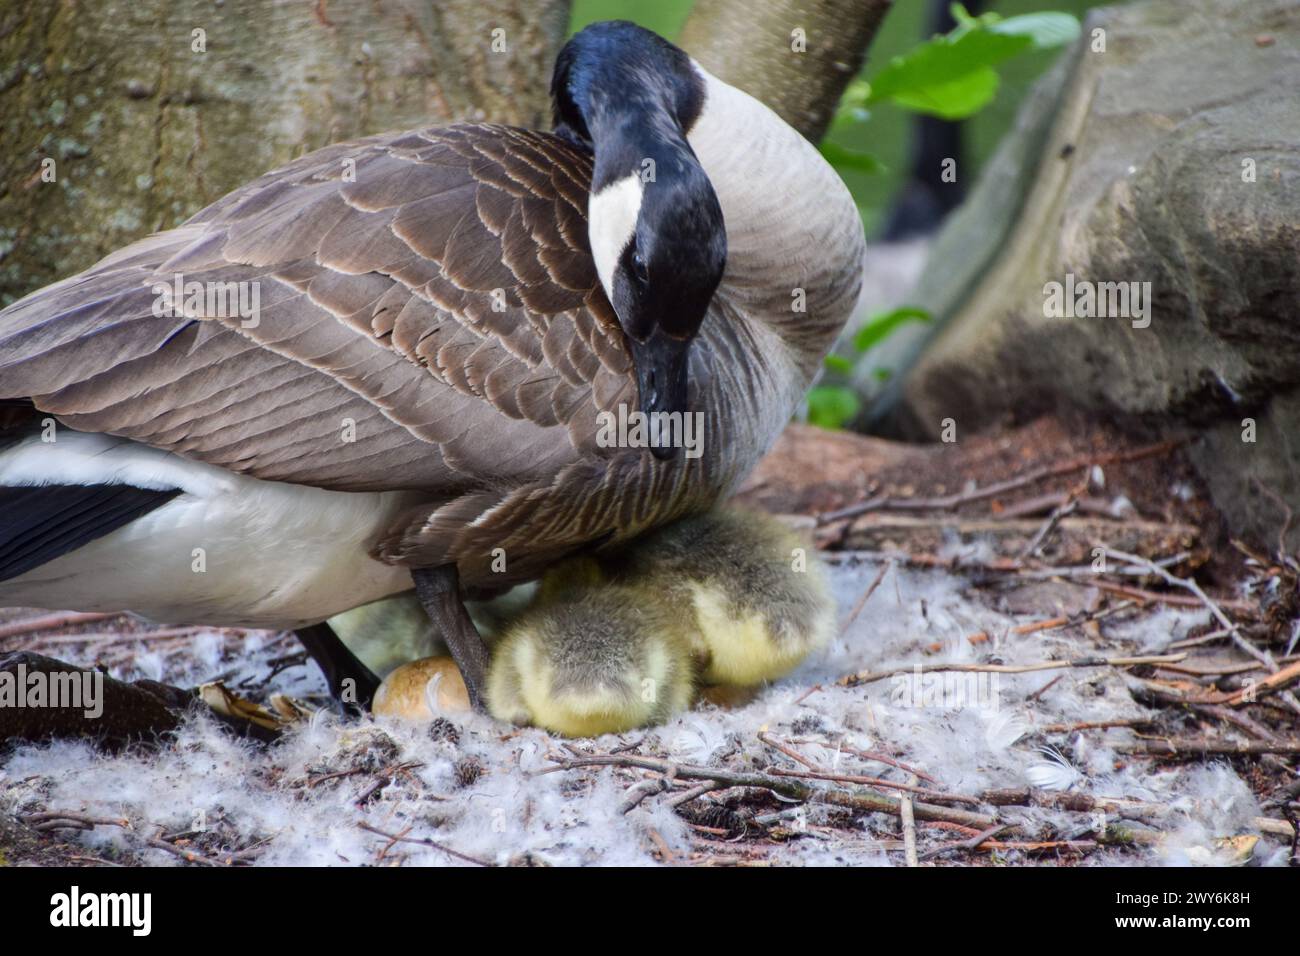 A mother Canada goose looks after her newborn babies in a nest in a park in Germany. Credit: Vuk Valcic/Alamy Stock Photo